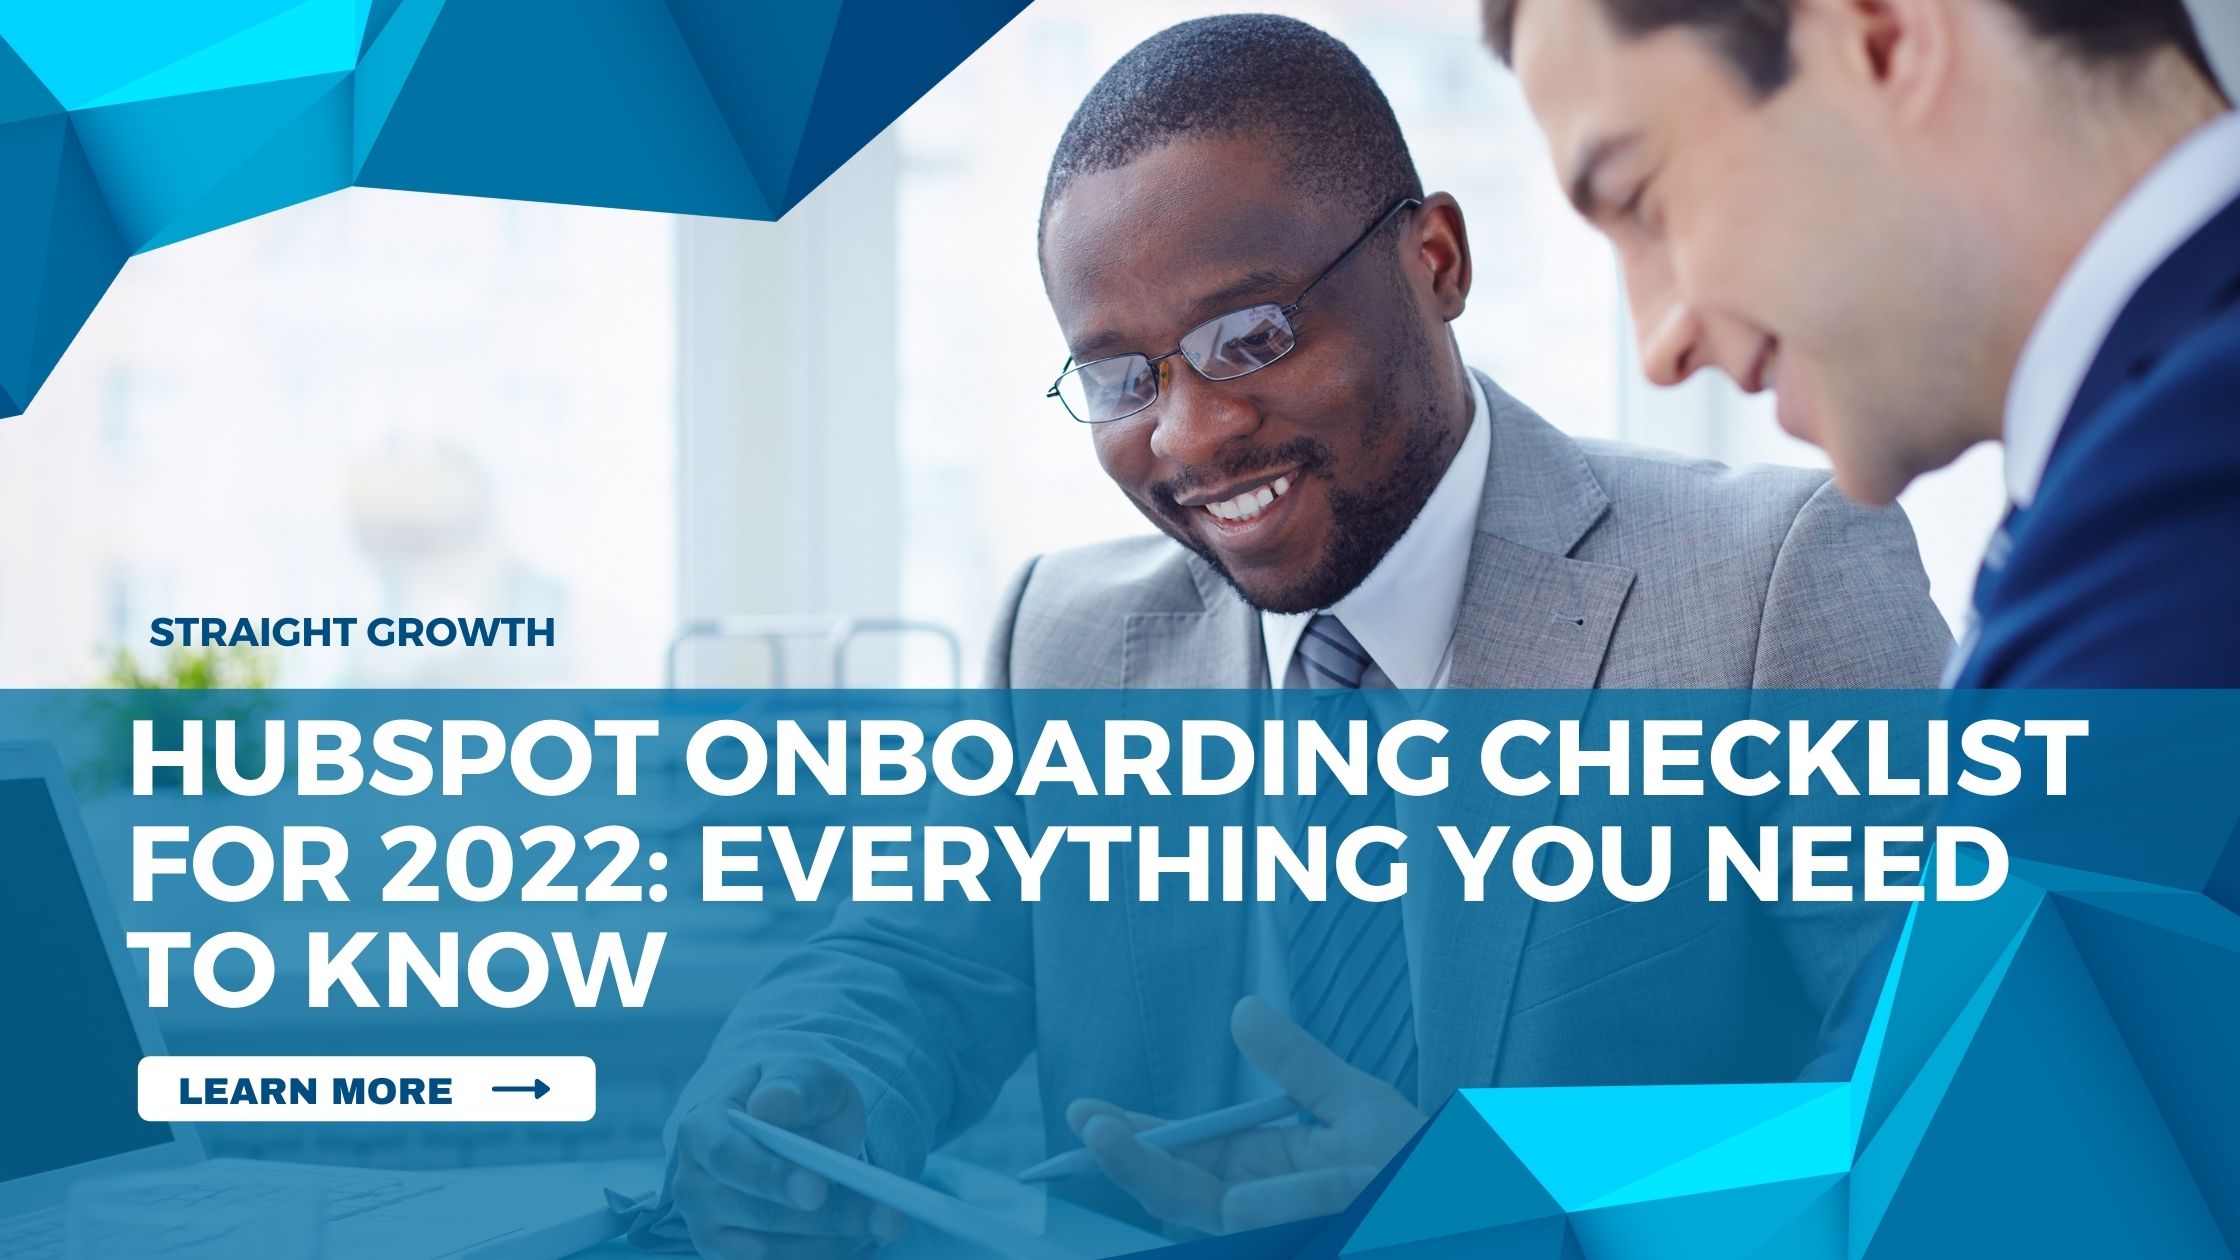 HubSpot Onboarding Checklist For 2022: Everything You Need to Know